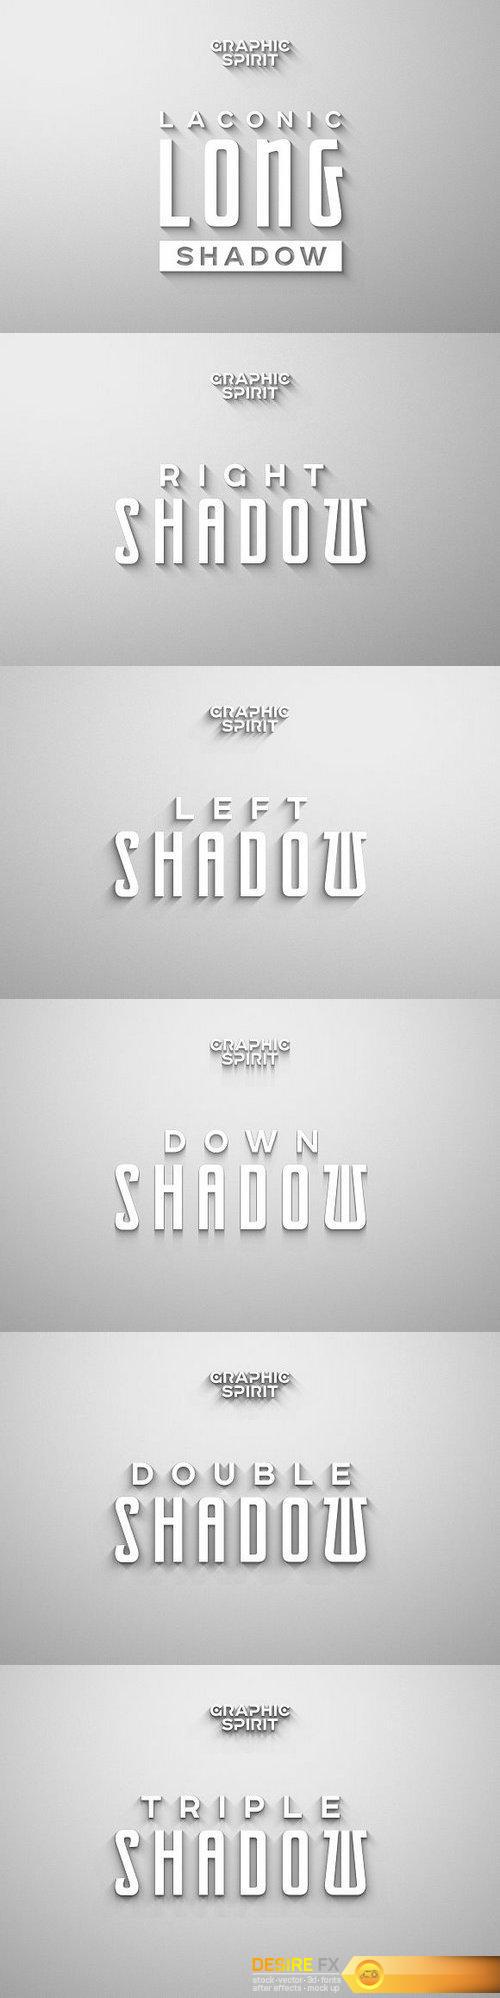 CM - Laconic Long Shadow for Photoshop 1072481